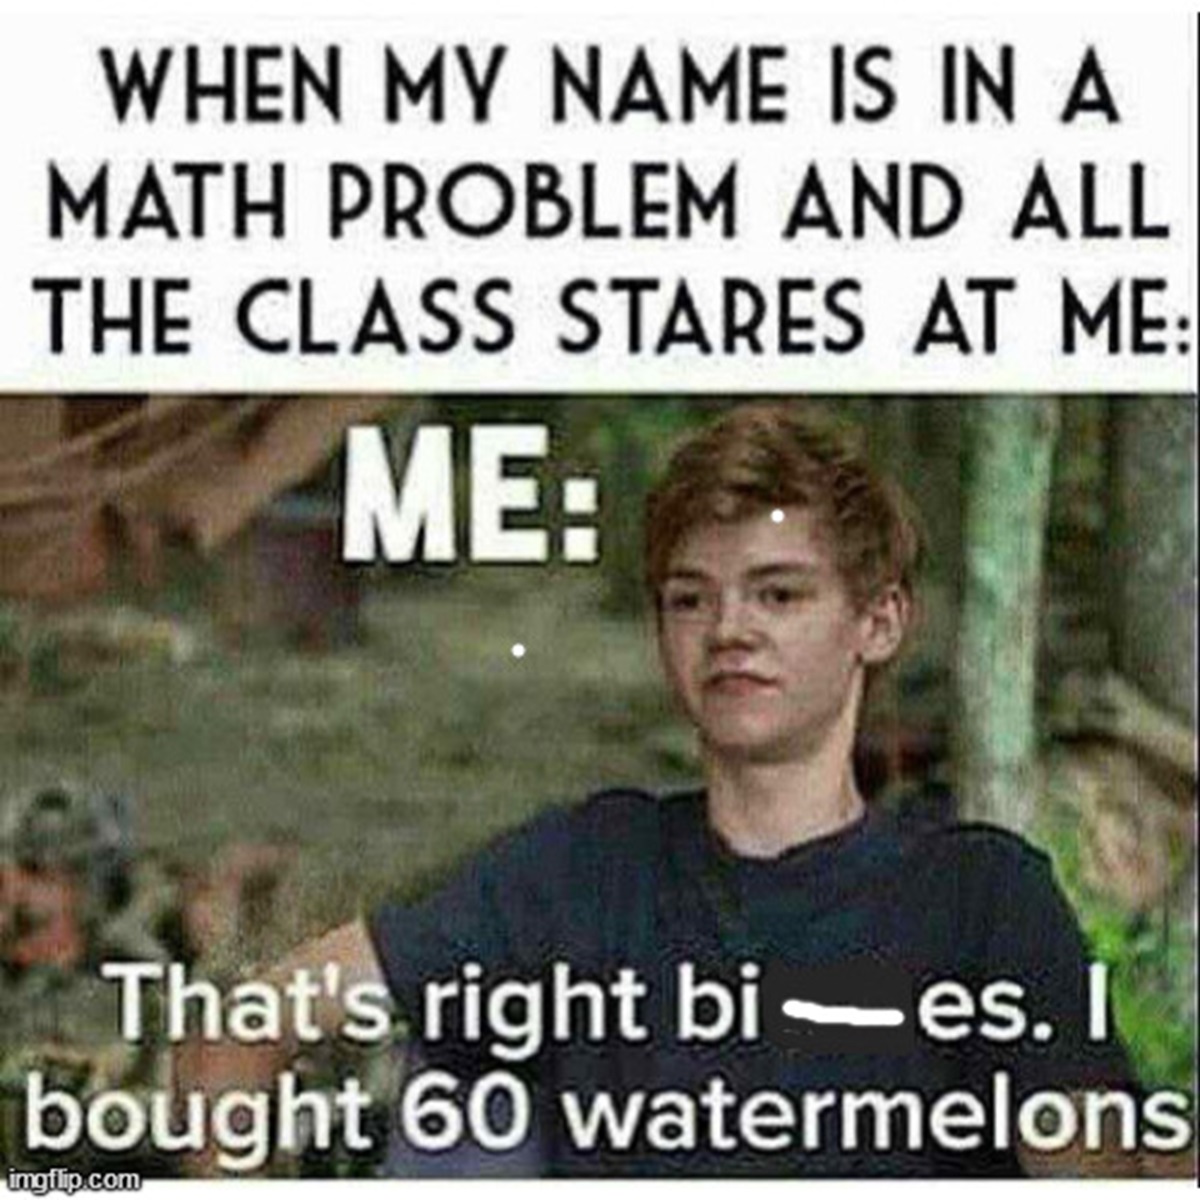 photo caption - When My Name Is In A Math Problem And All The Class Stares At Me Me That's right bies. bought 60 watermelons imgflip.com